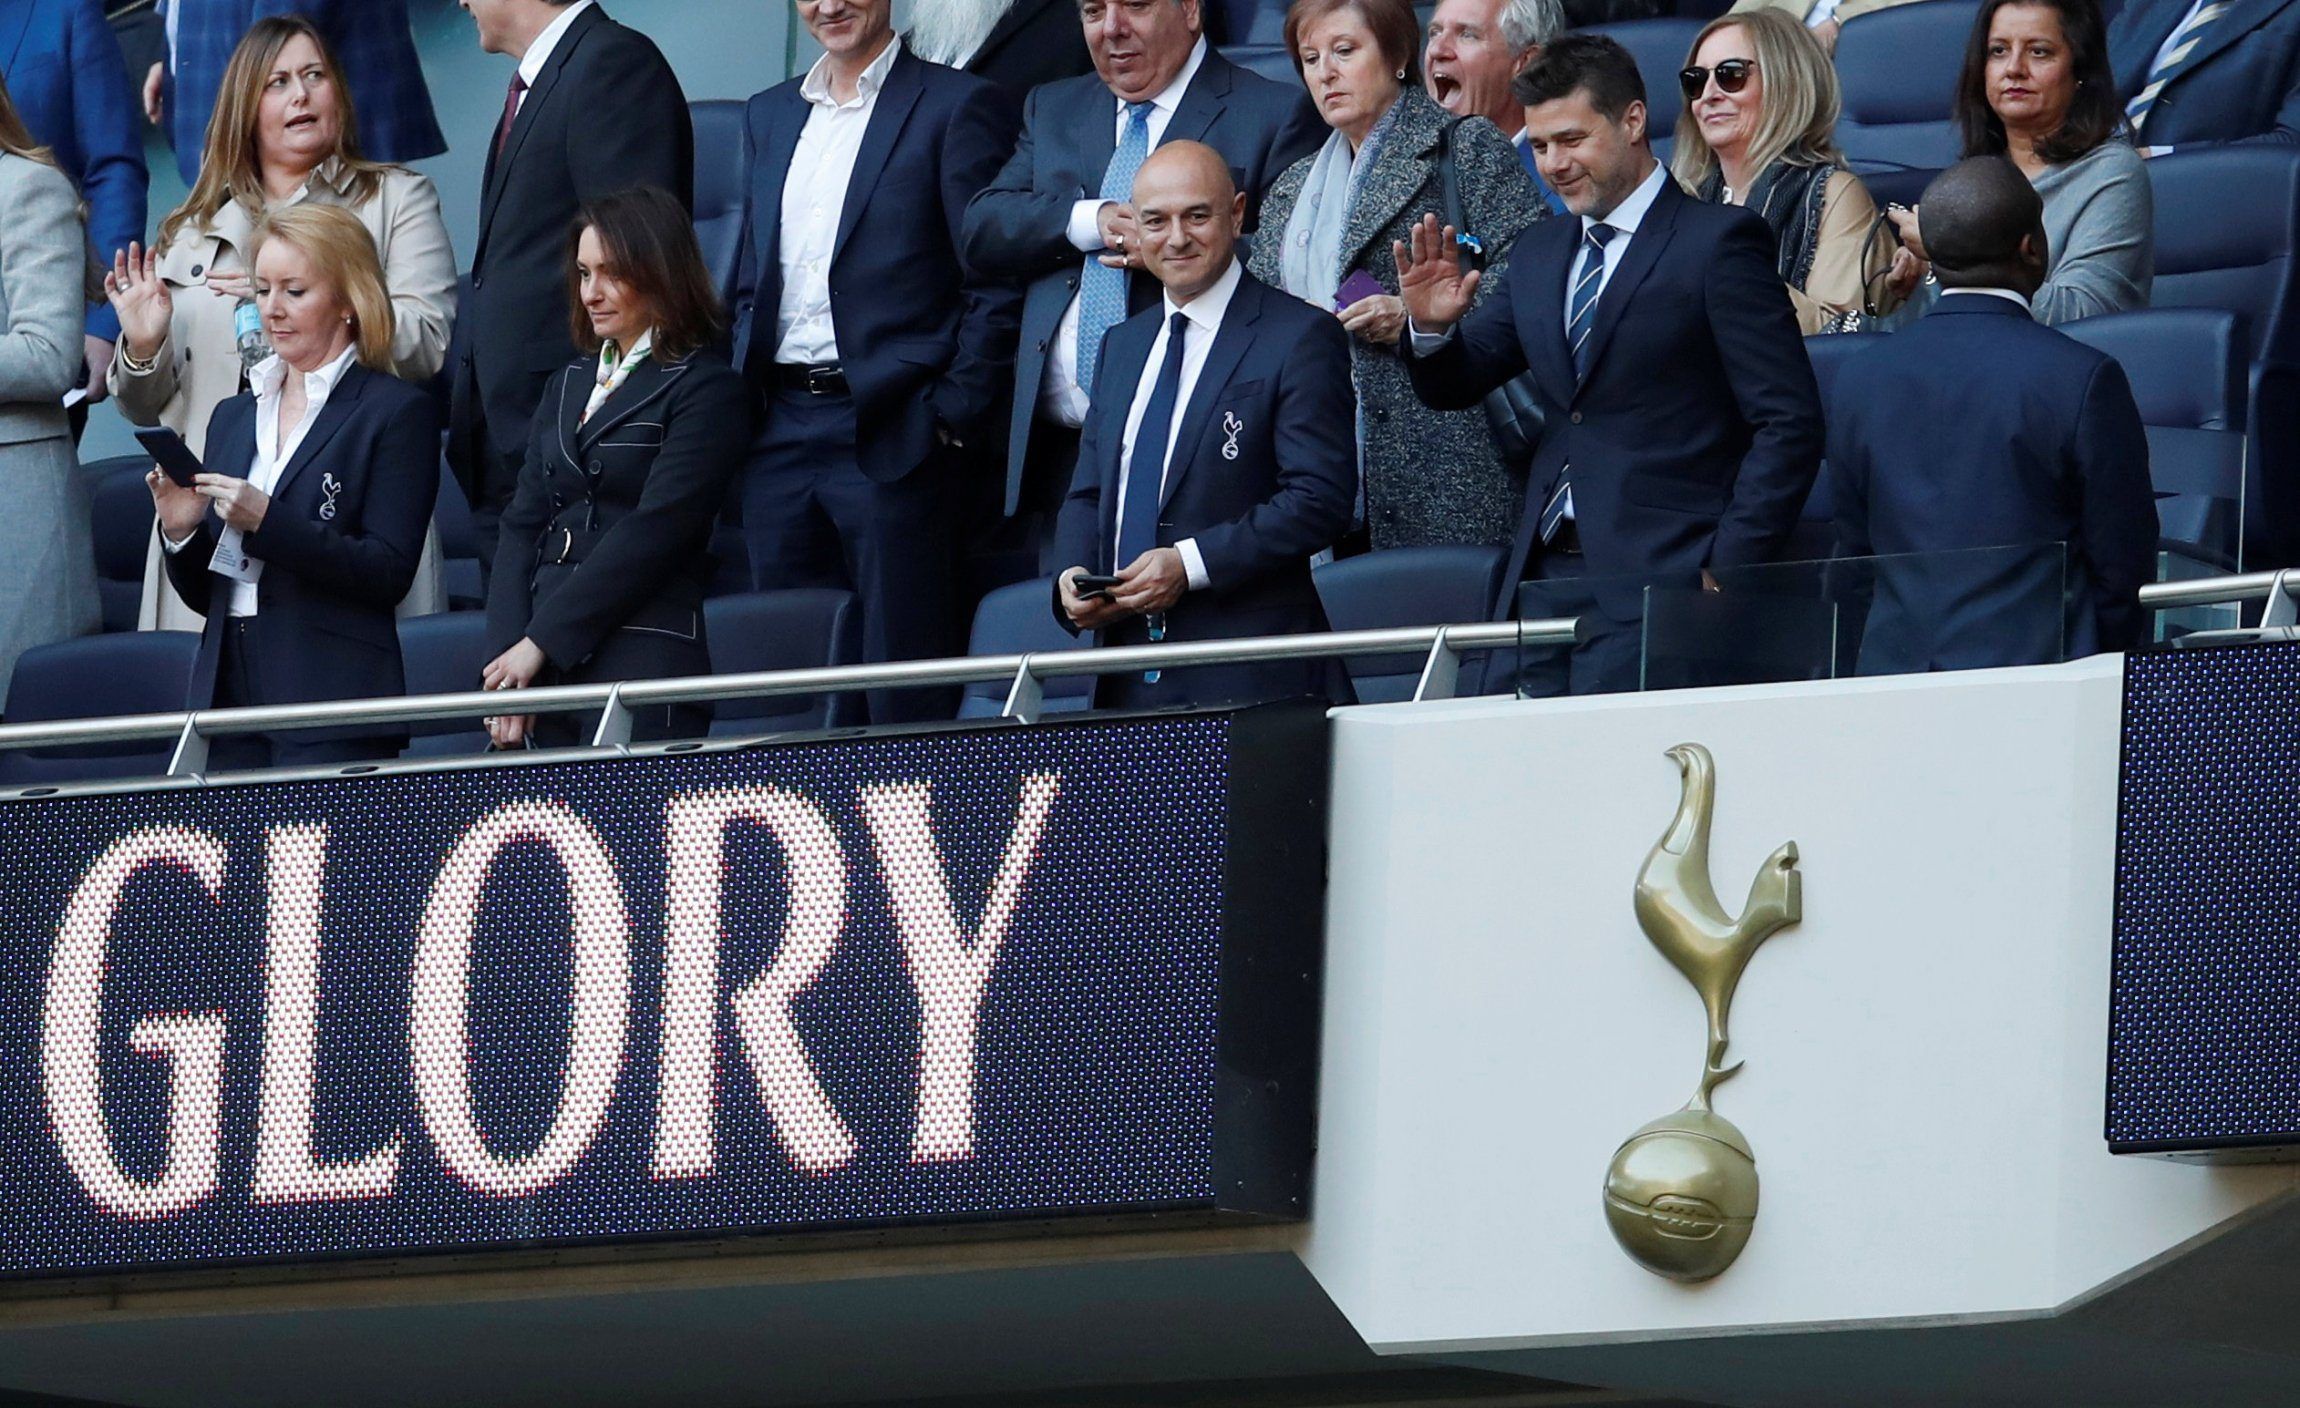 spurs chairman daniel levy with mauricio pochettino in the stands tottenham hotspur stadium test event